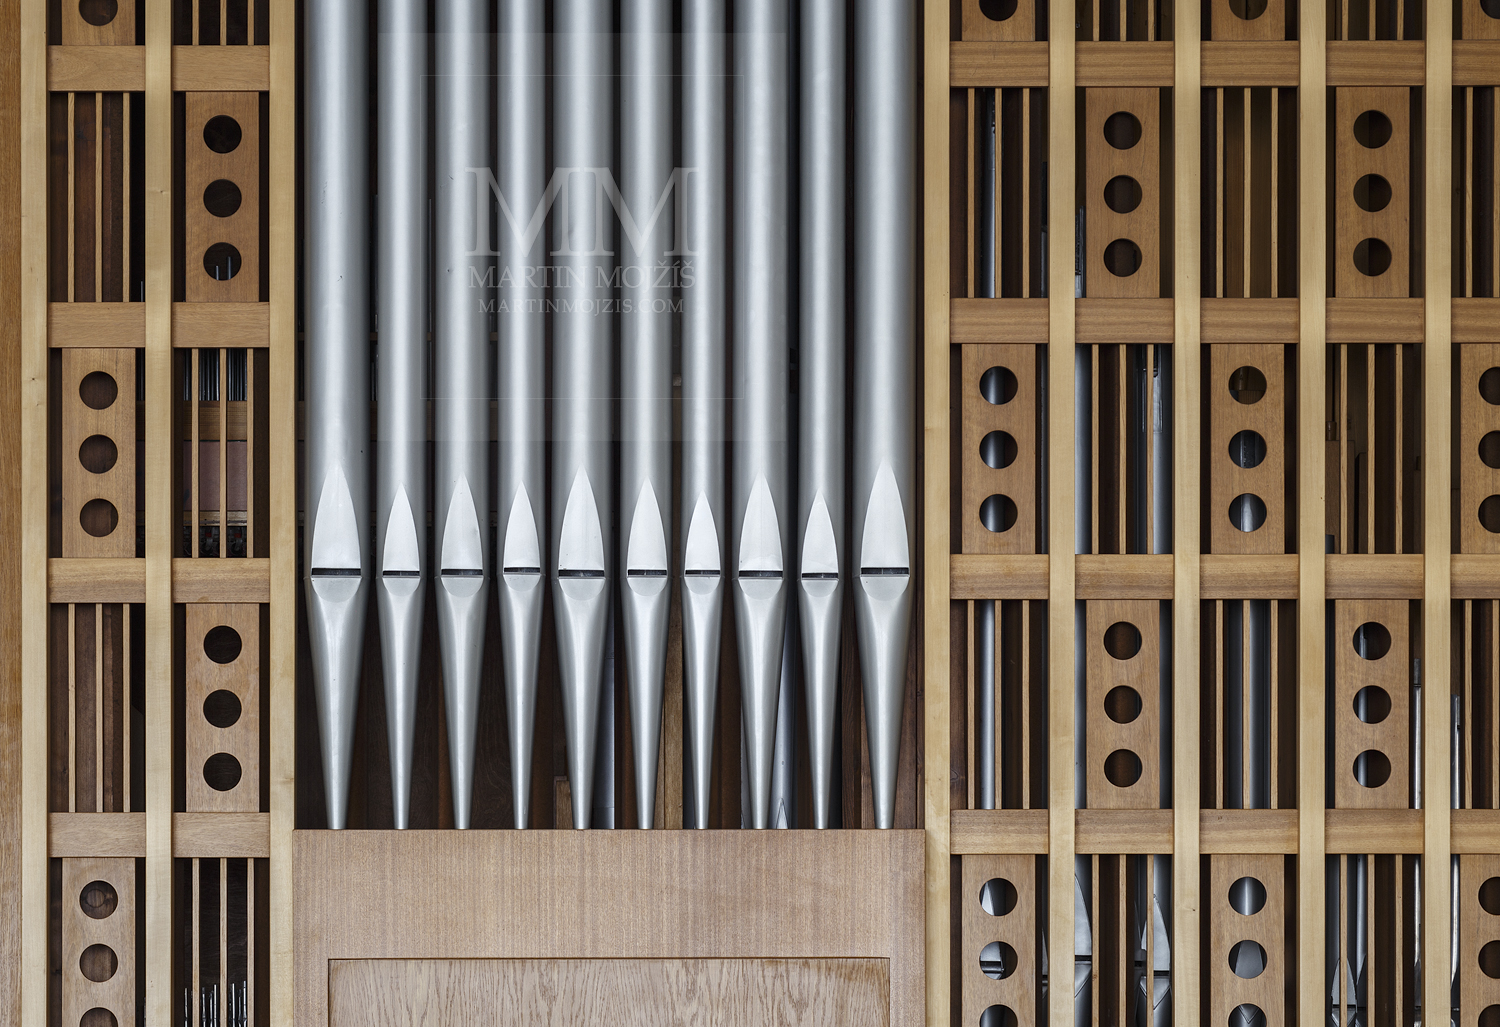 Melnik City Hall – organ in the ceremonial hall. Professional photography of architecture - interiors.